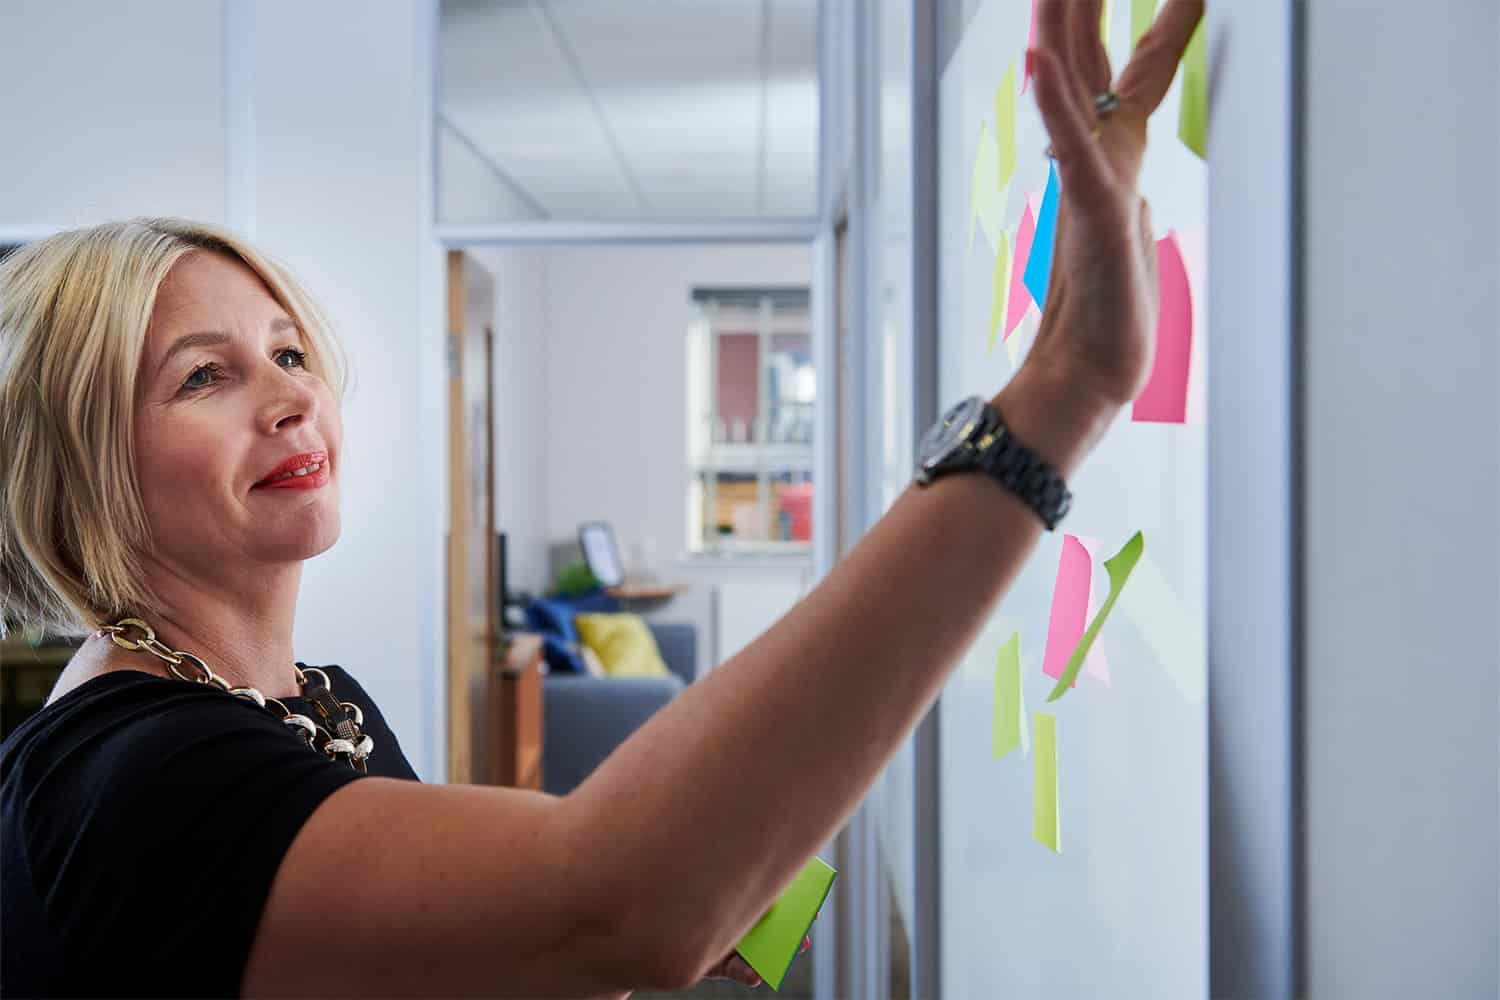 A woman is pointing at sticky notes on a whiteboard.